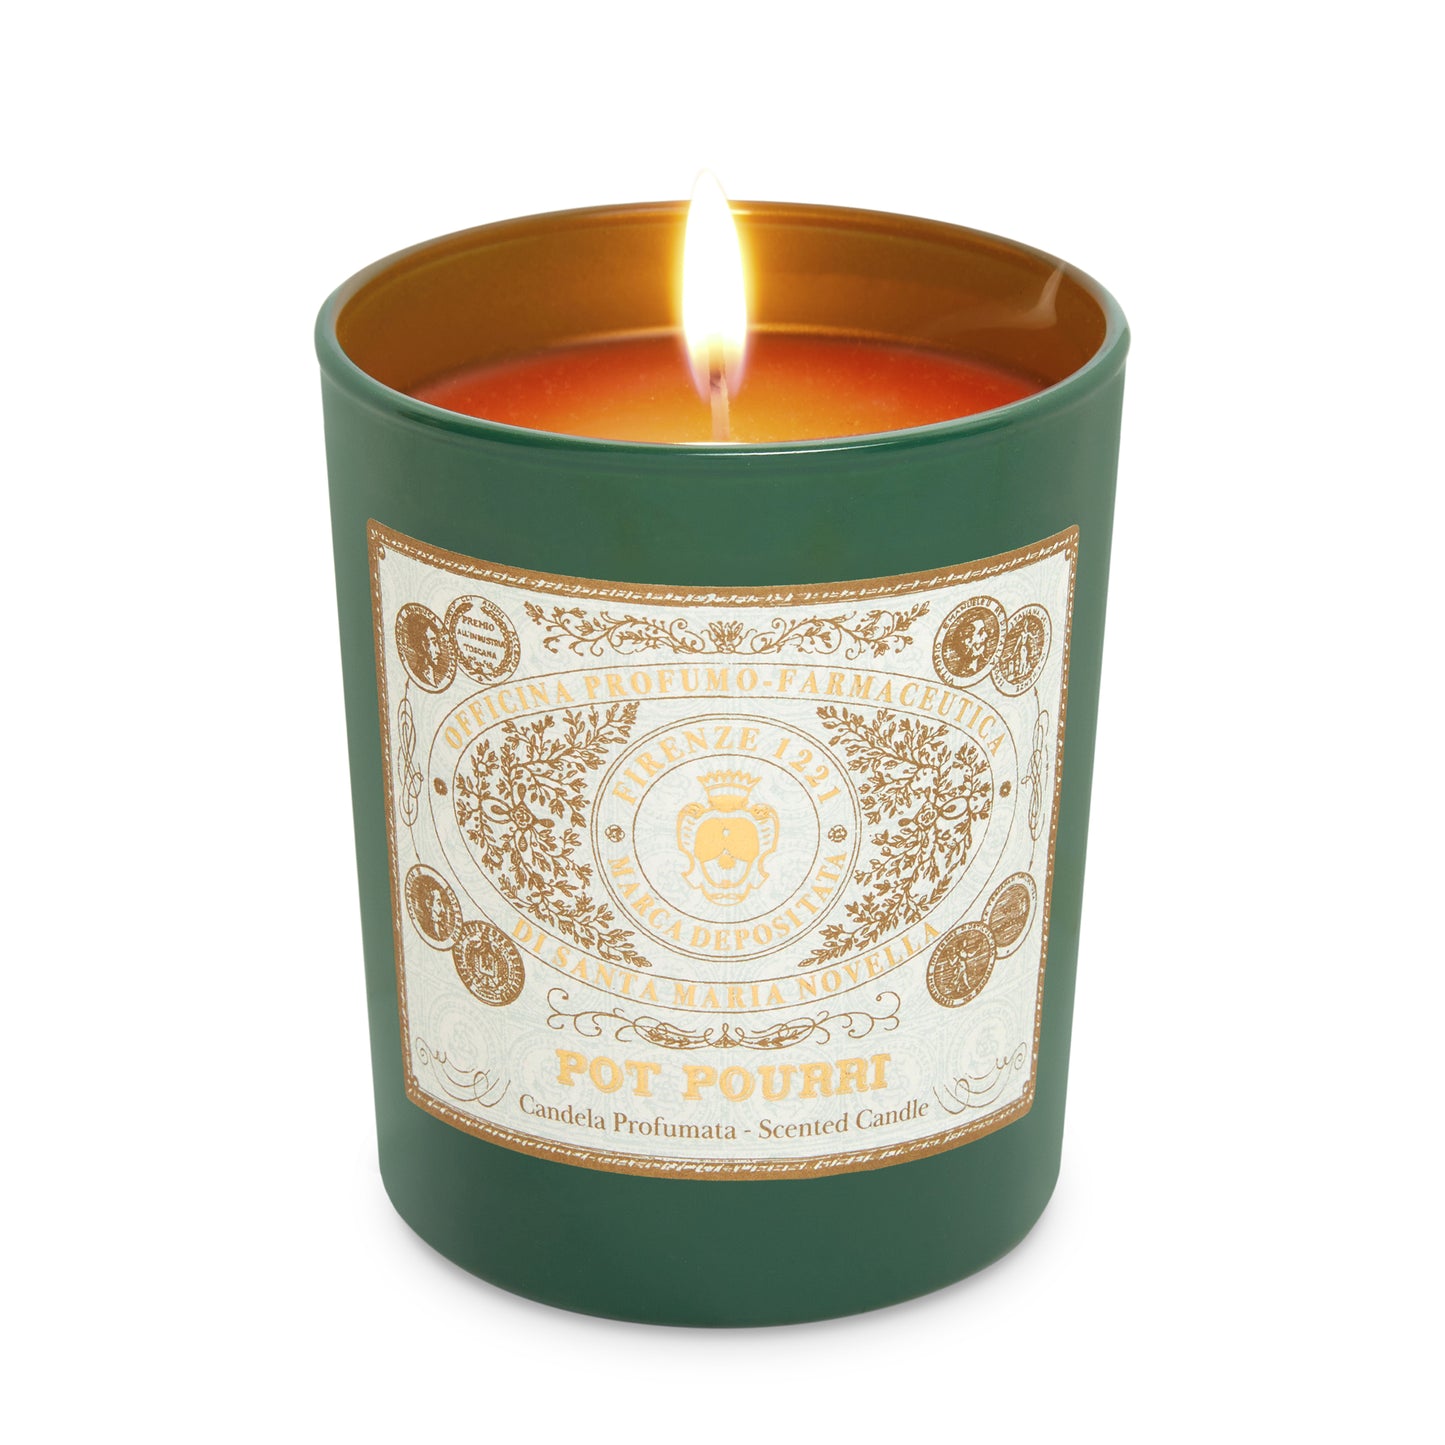 Primary Image of Pot Pourri Scented Candle